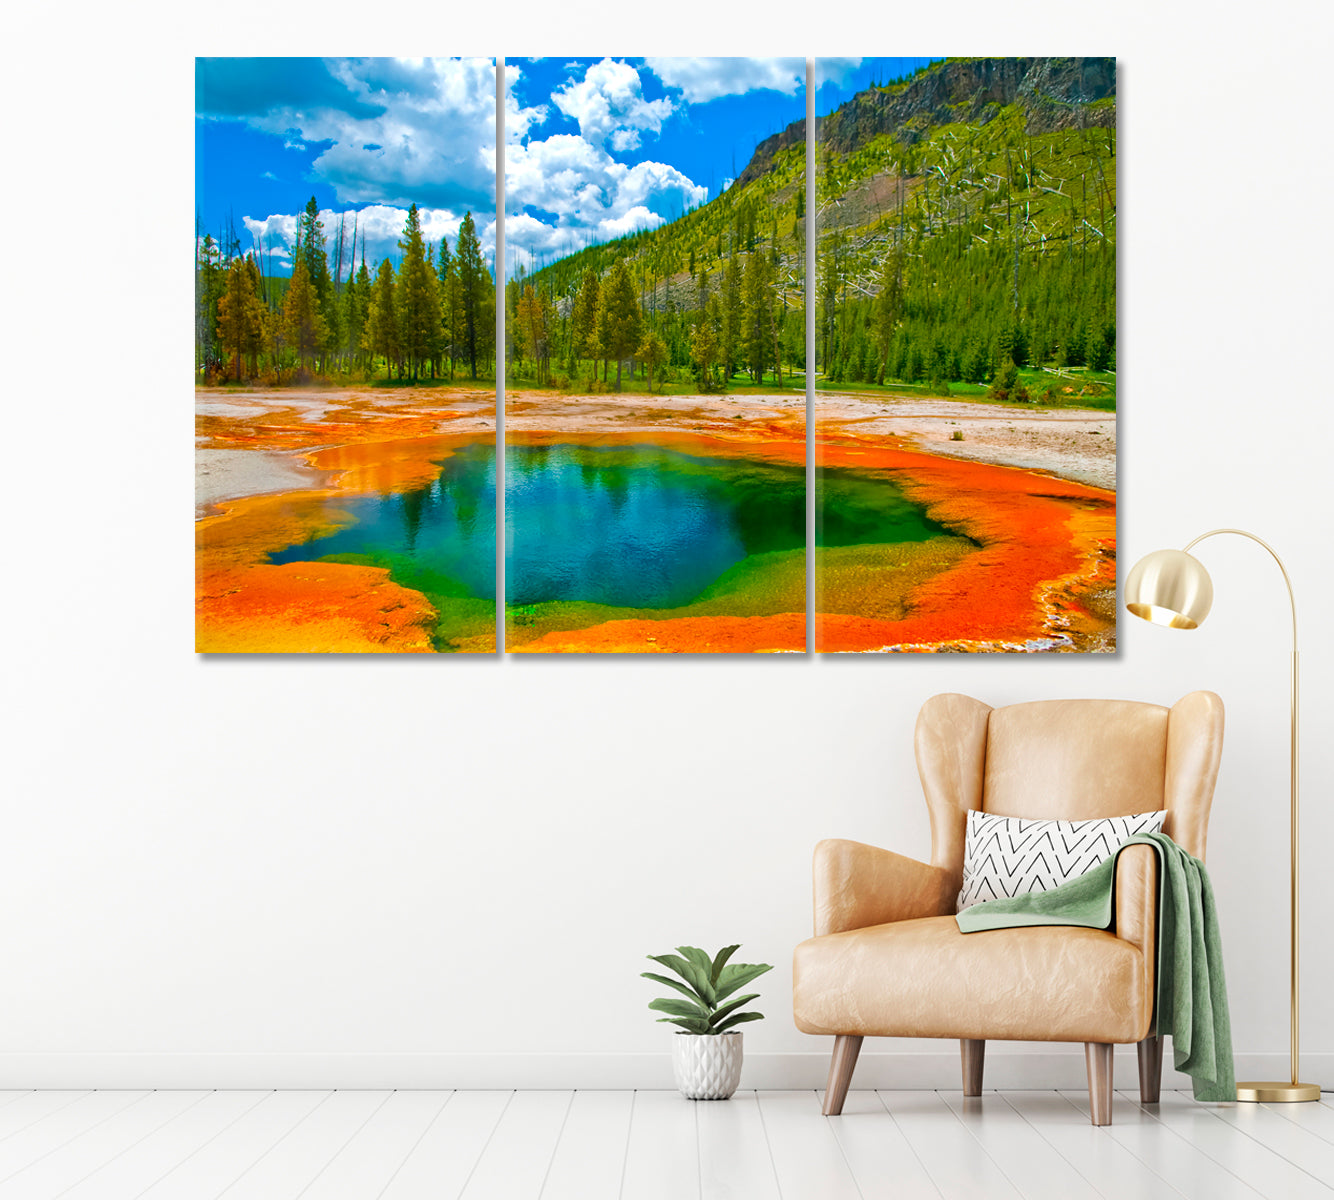 Crested Pool Yellowstone National Park Wyoming Canvas Print ArtLexy 3 Panels 36"x24" inches 